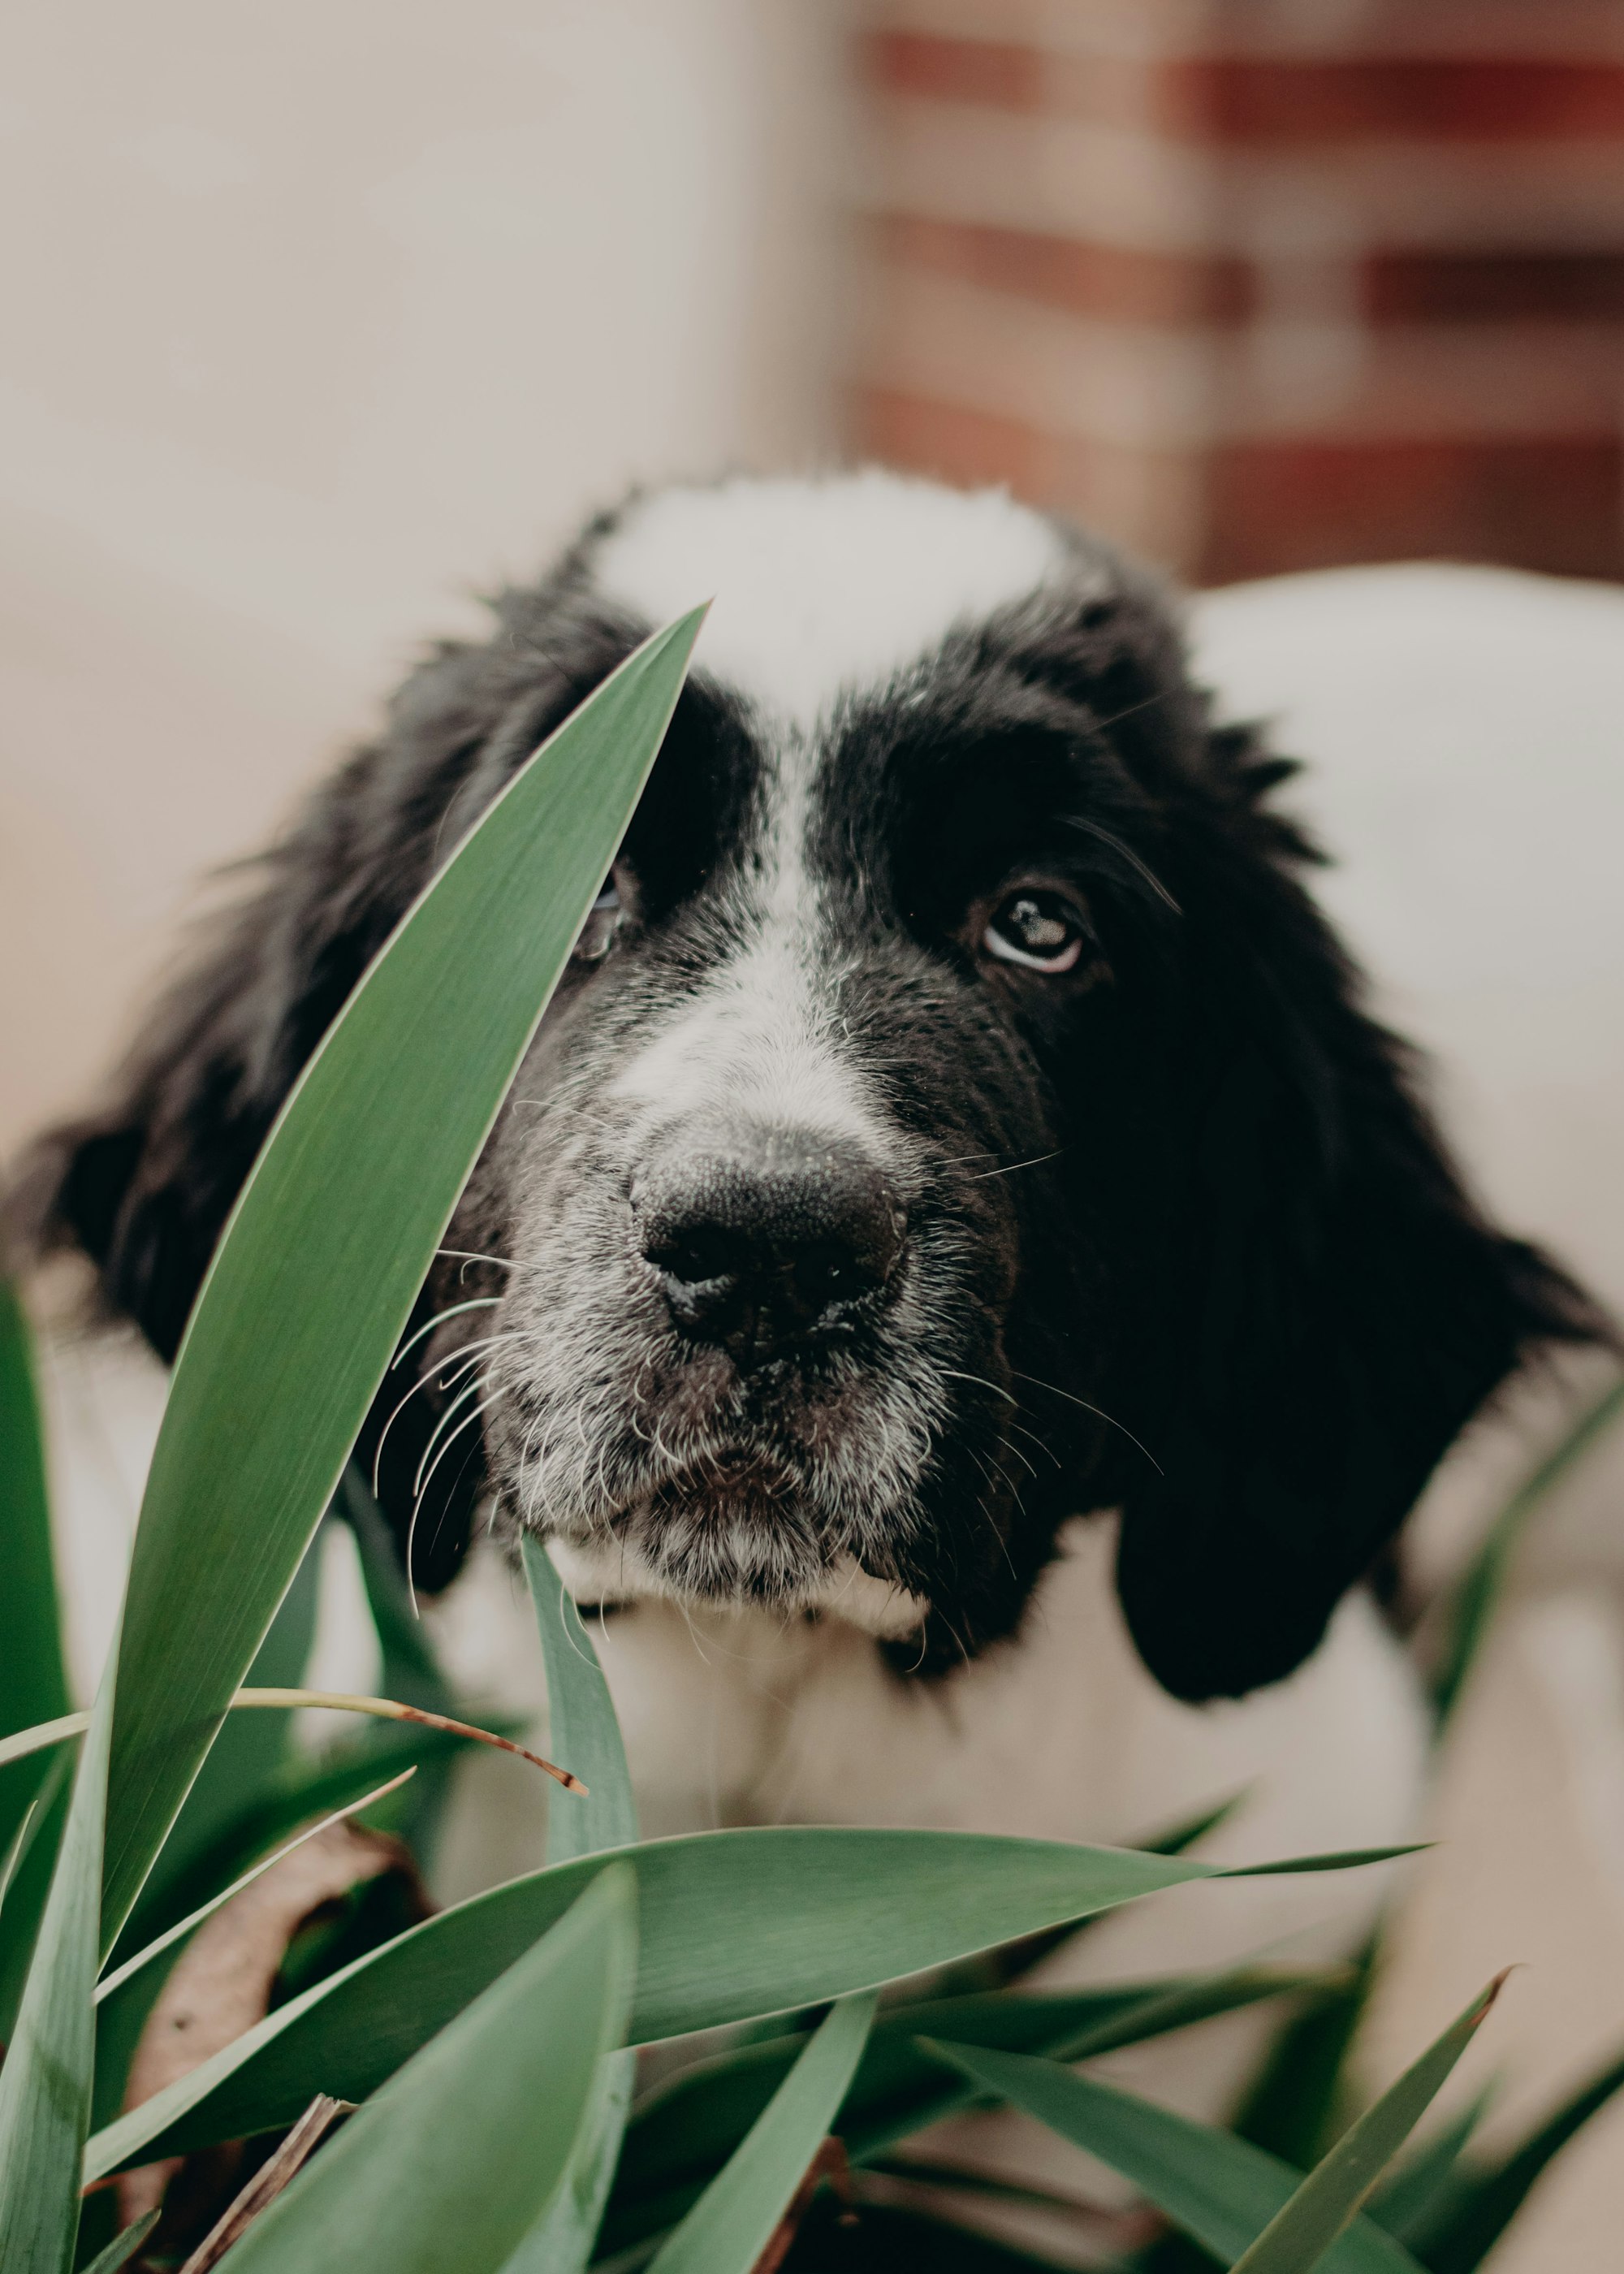 6 Houseplants That Are Safe for Dogs